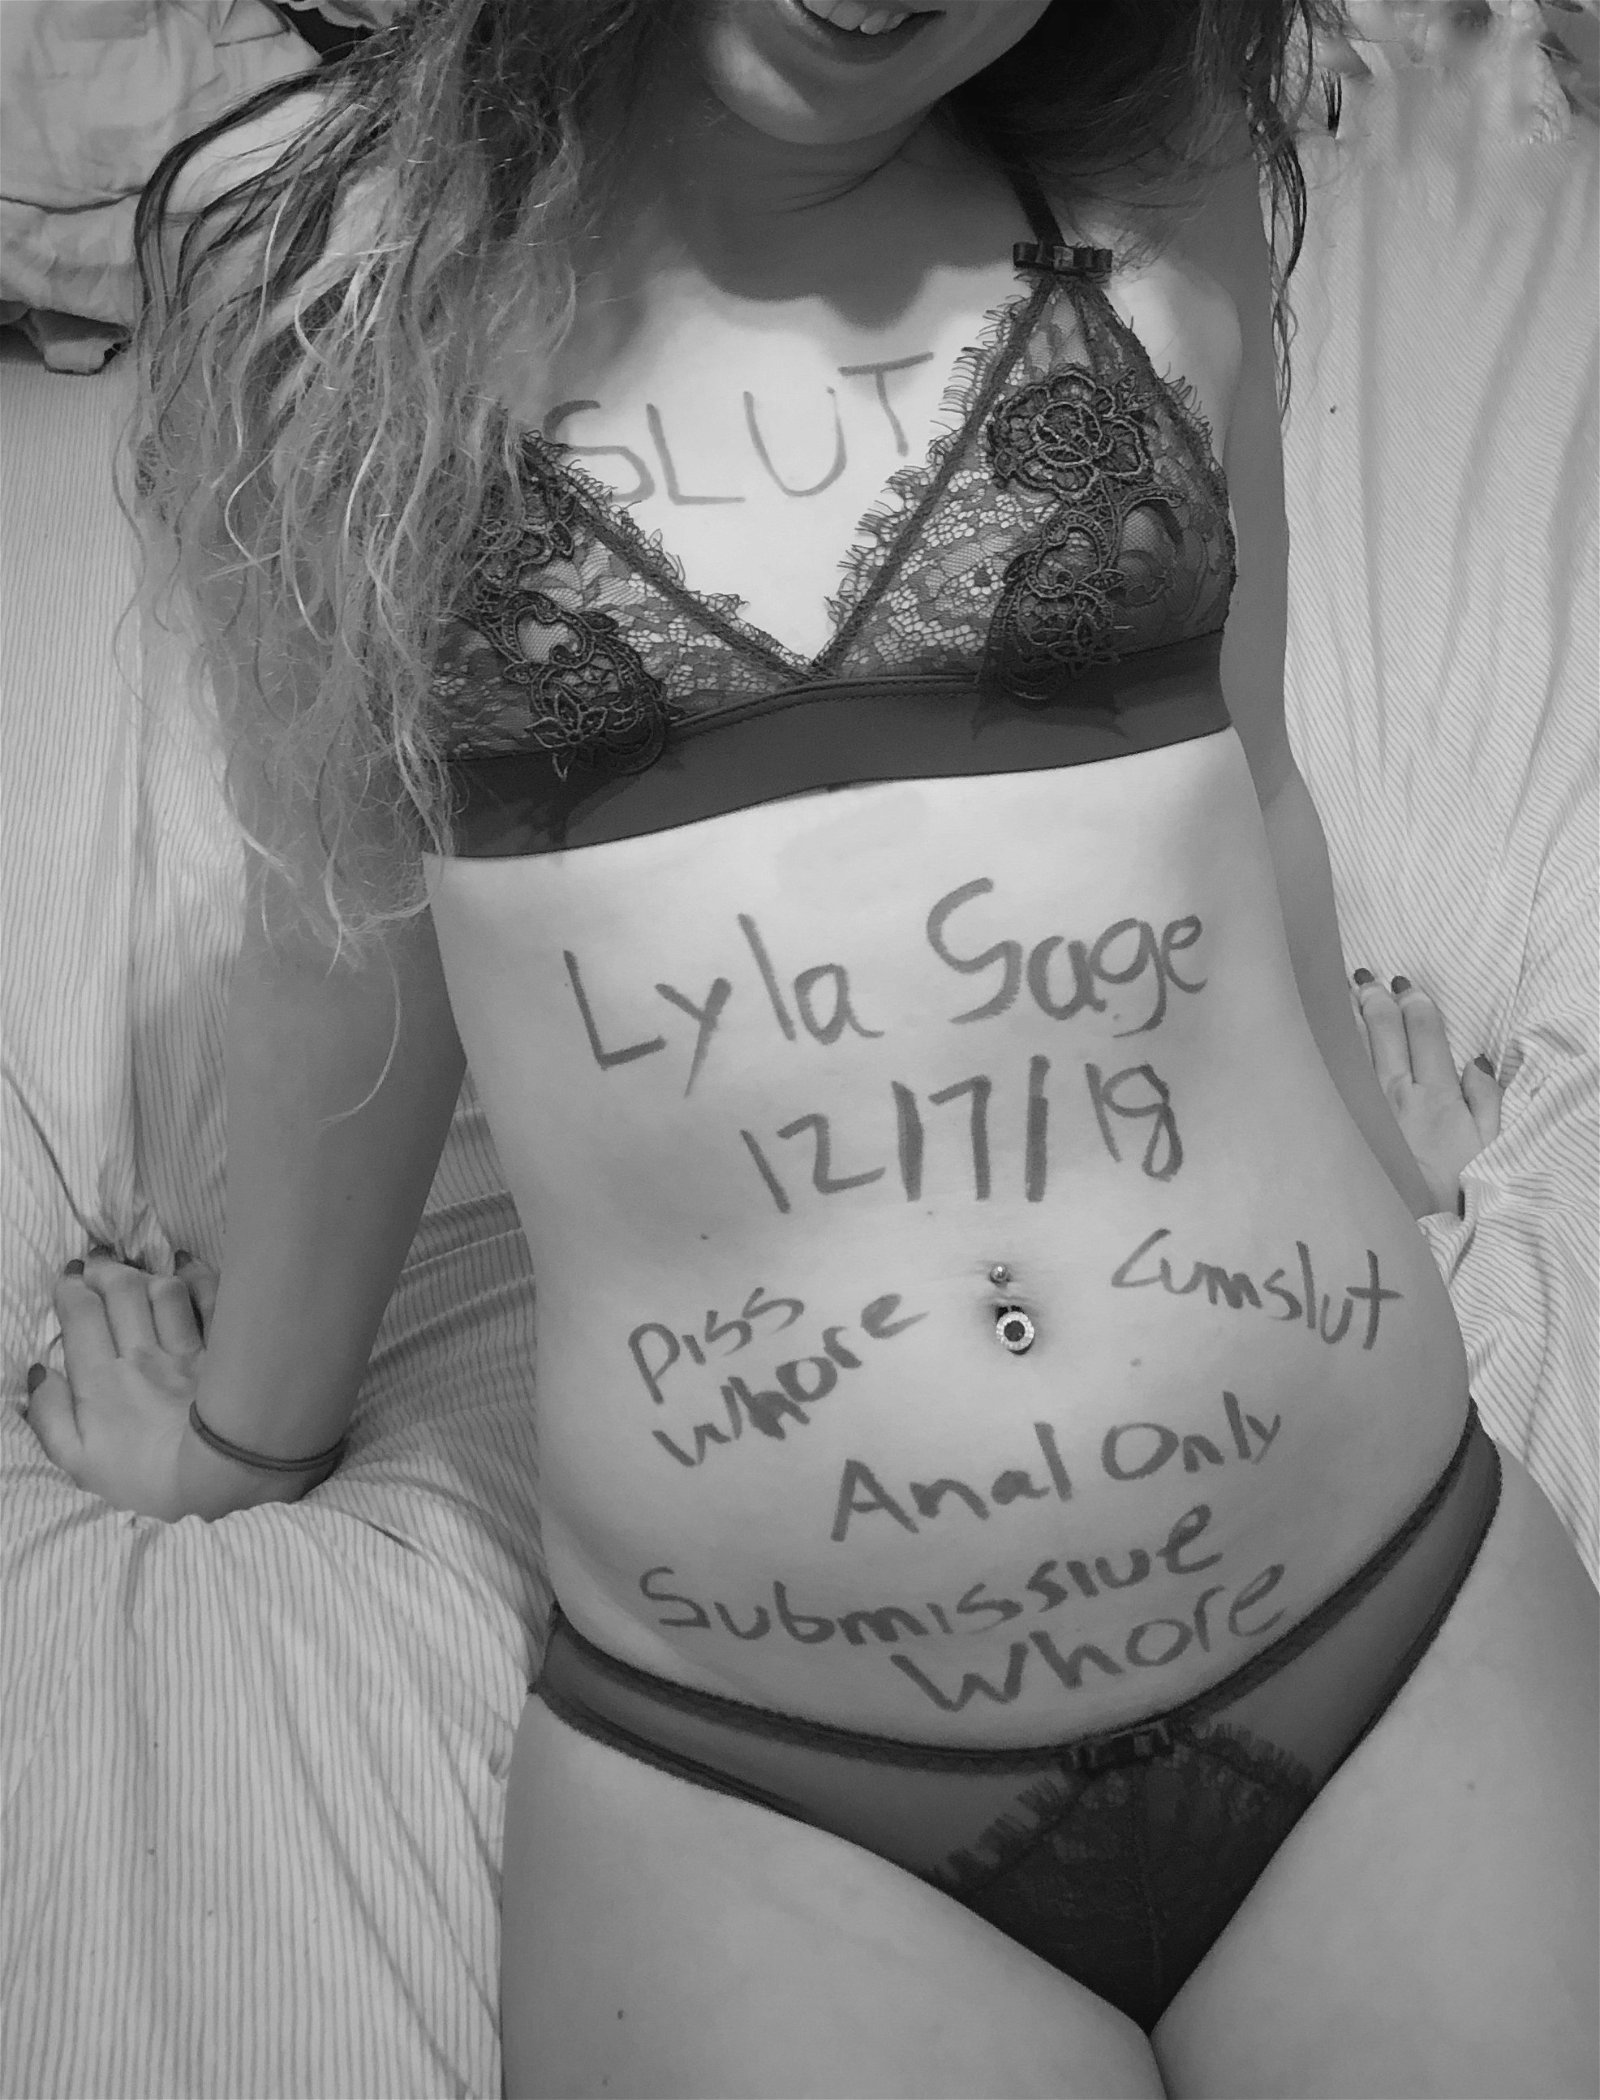 Watch the Photo by LylaSage with the username @LylaSage, who is a verified user, posted on December 9, 2018